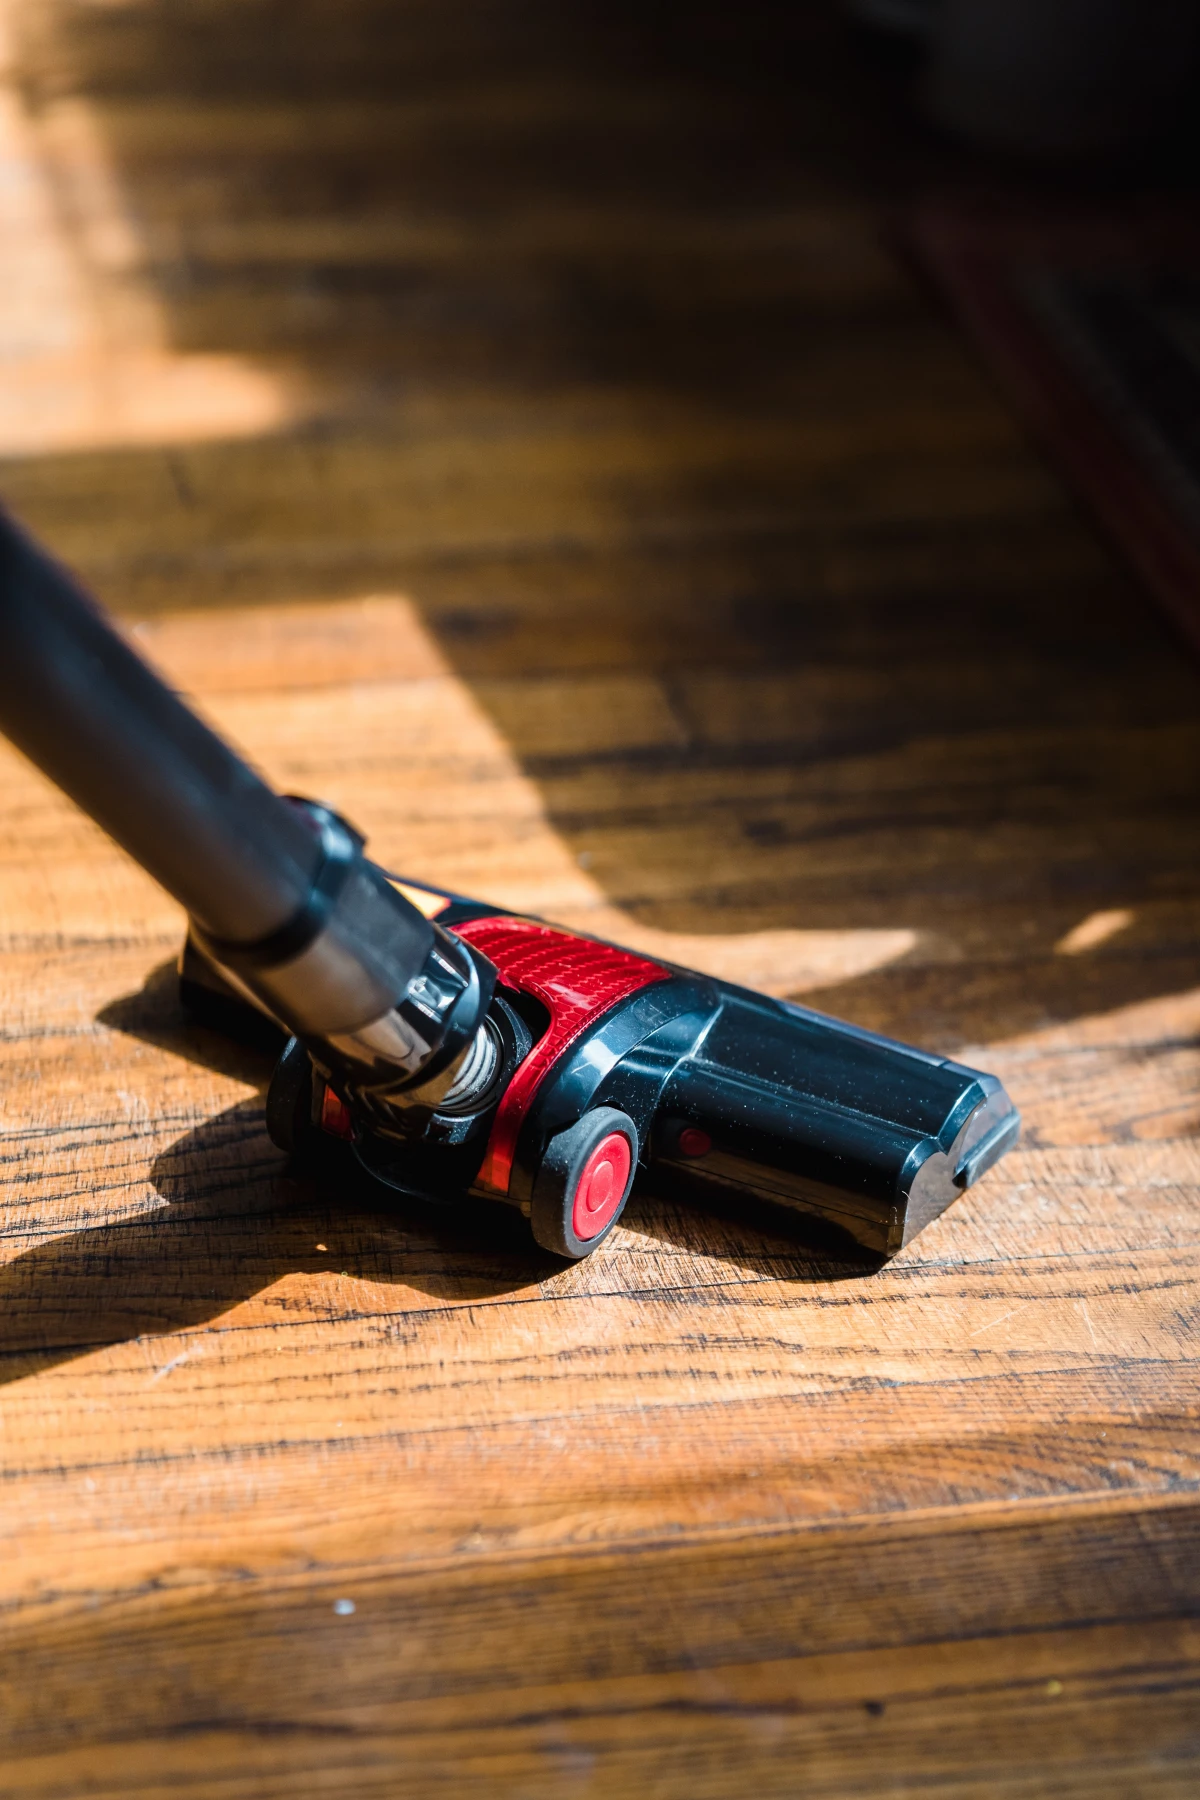 mopping mistakes vacuuming on wooden floor